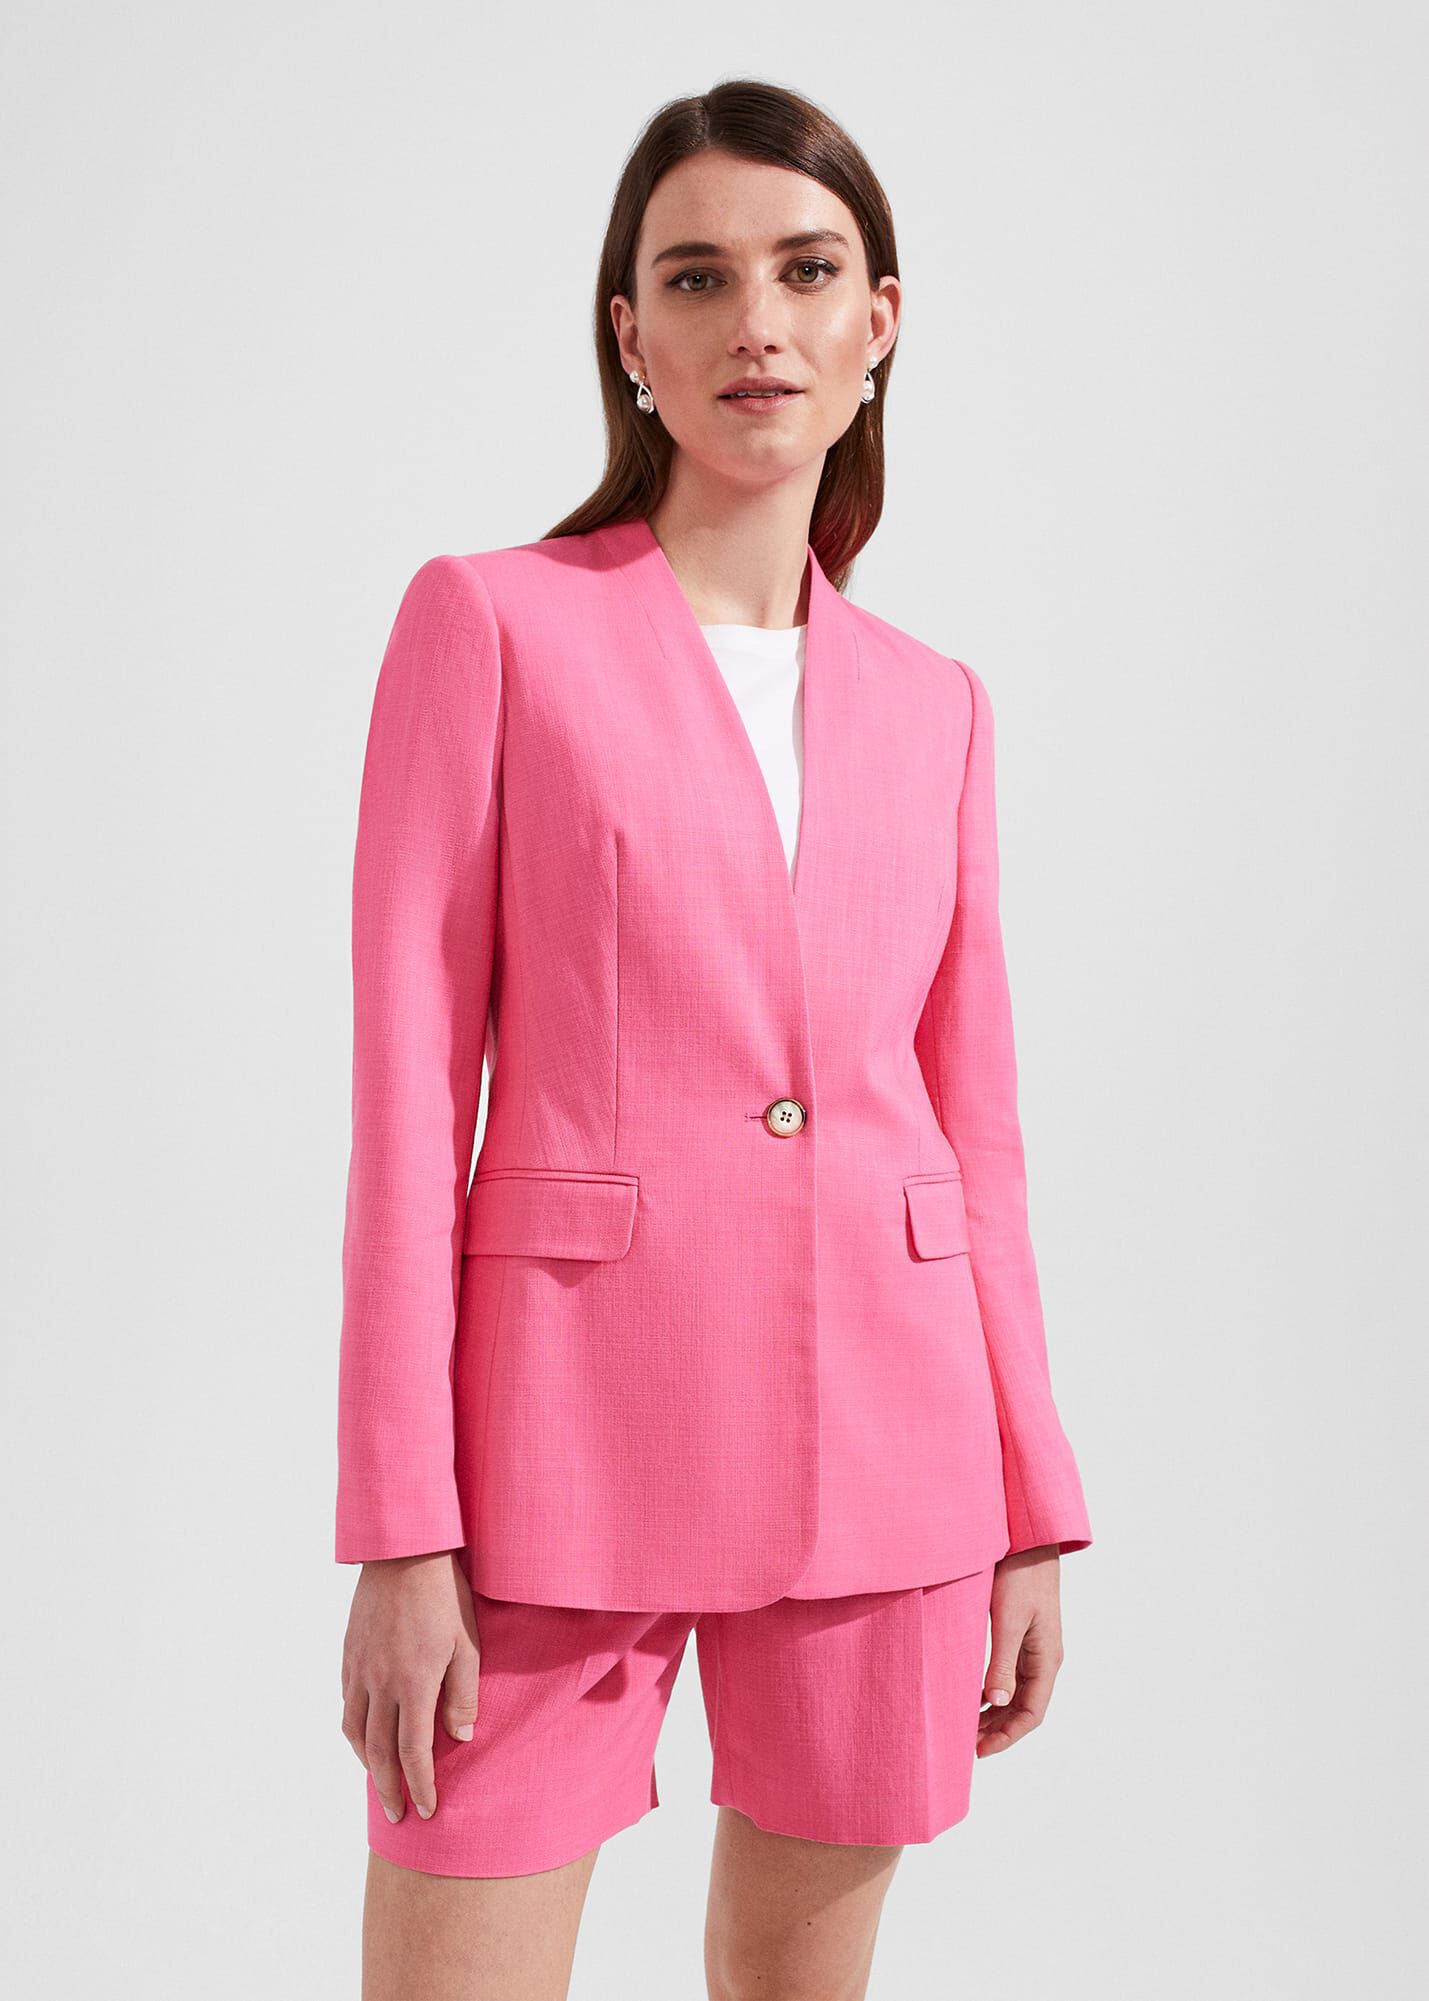 Brightlycoloured trouser suits from the high street page sep  sitename  The Mail